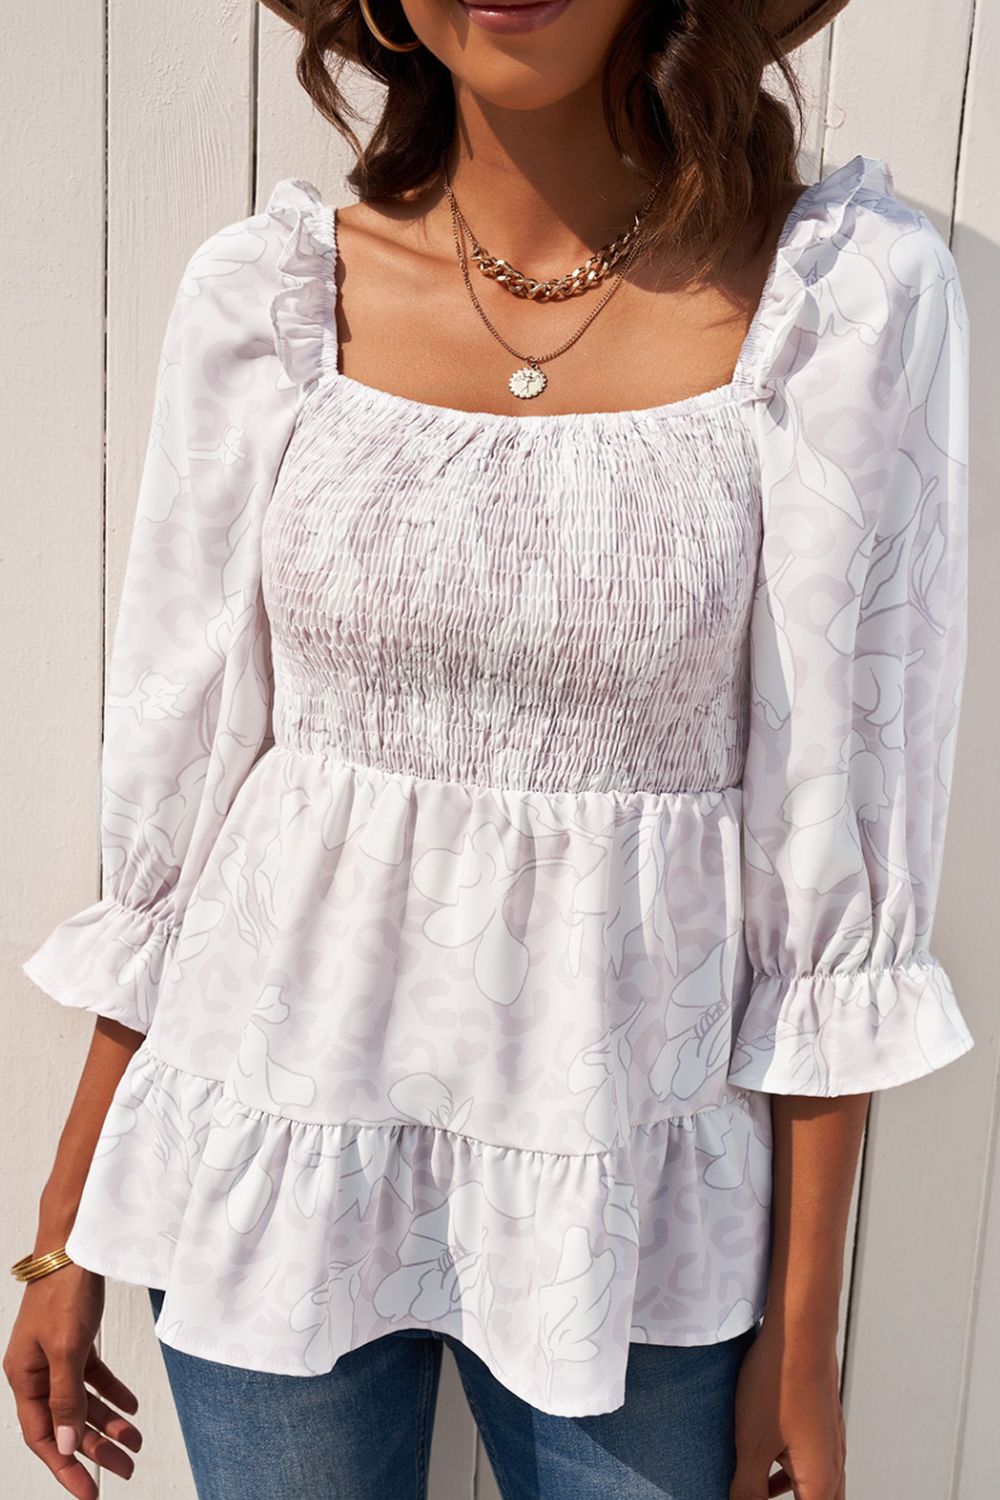 Women's Floral Smocked Ruffled Babydoll Top